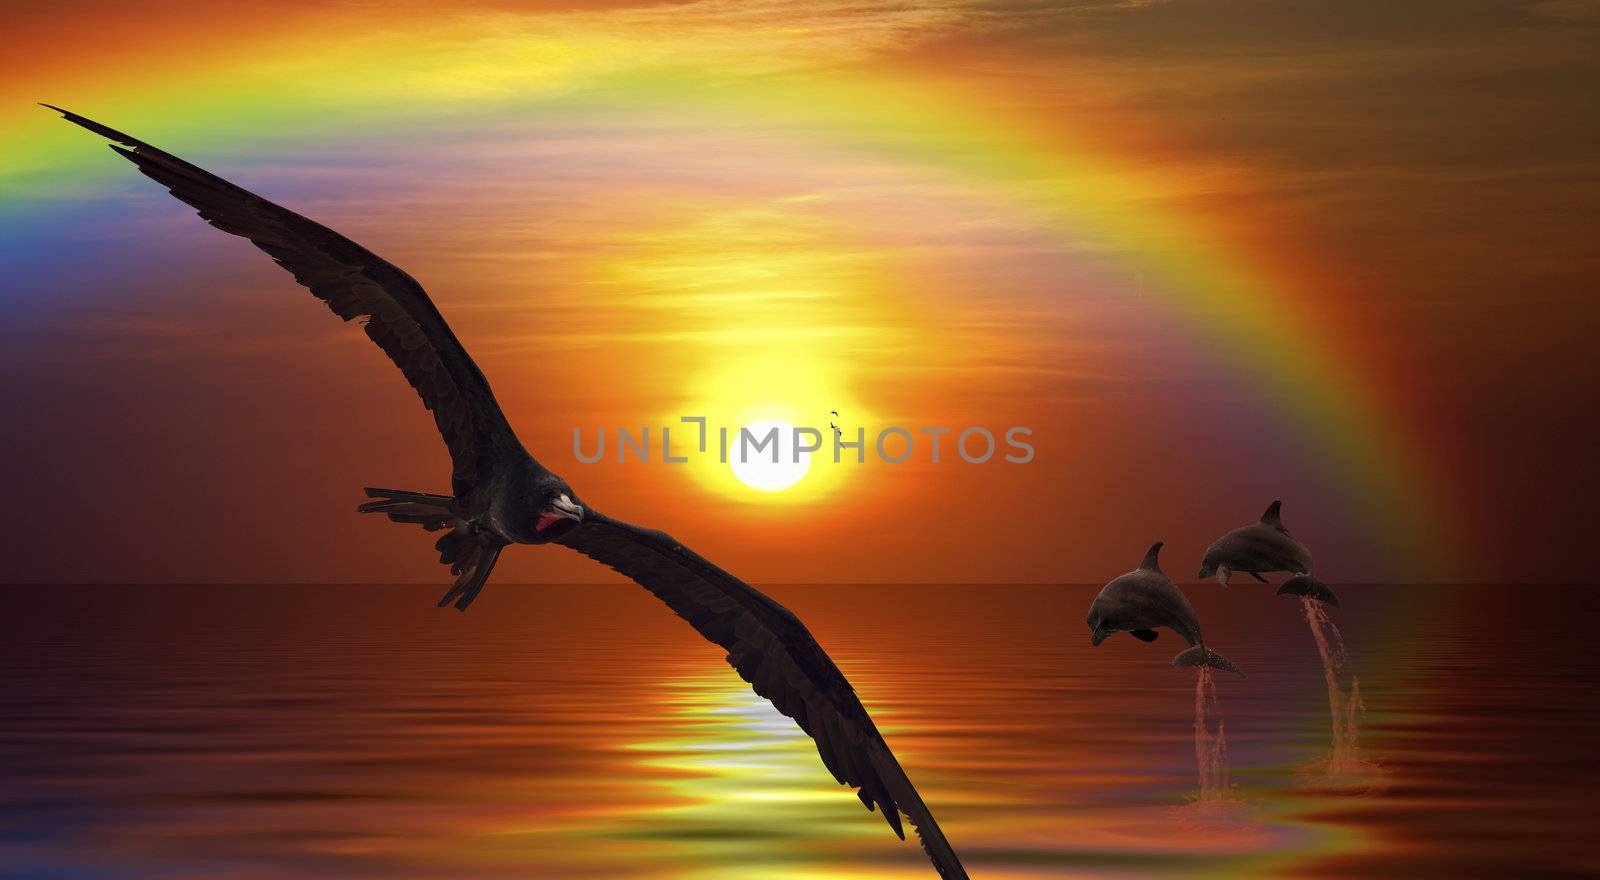 Fantasy picture of a bird flying, and dolphins jumping in the sunset